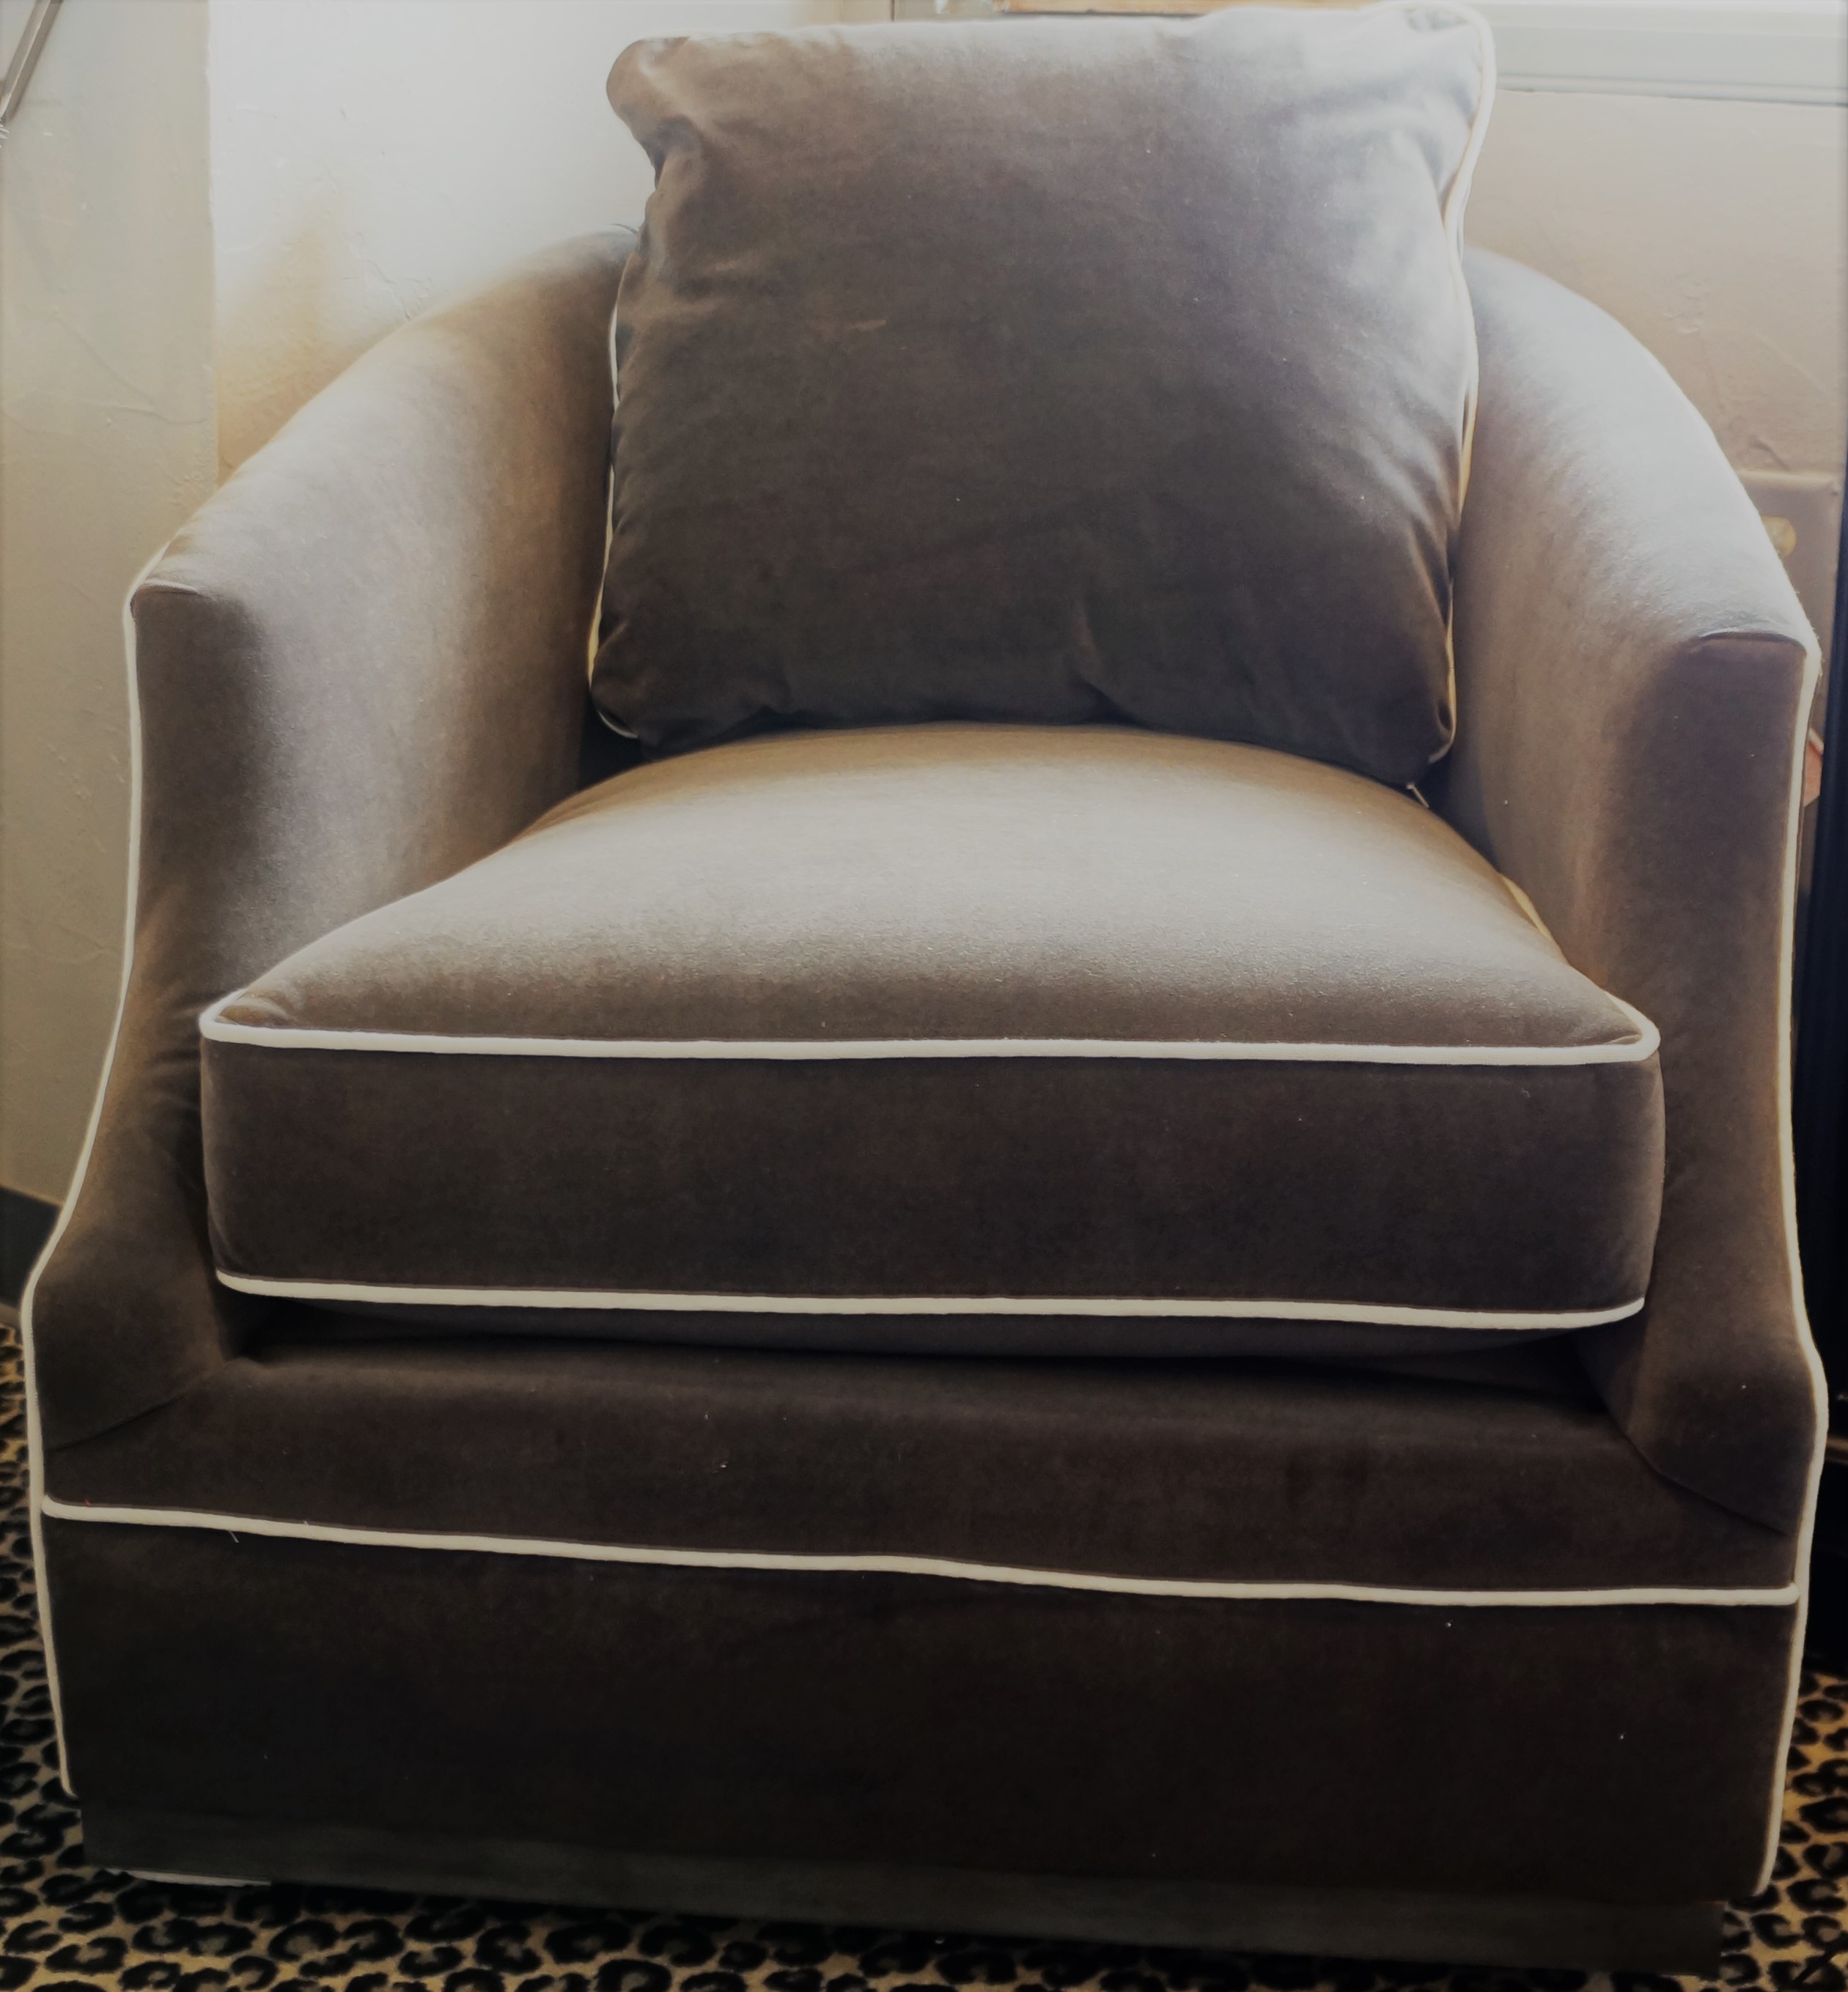 Gray Barrel Swivel Chair with Cream Piping Nuance